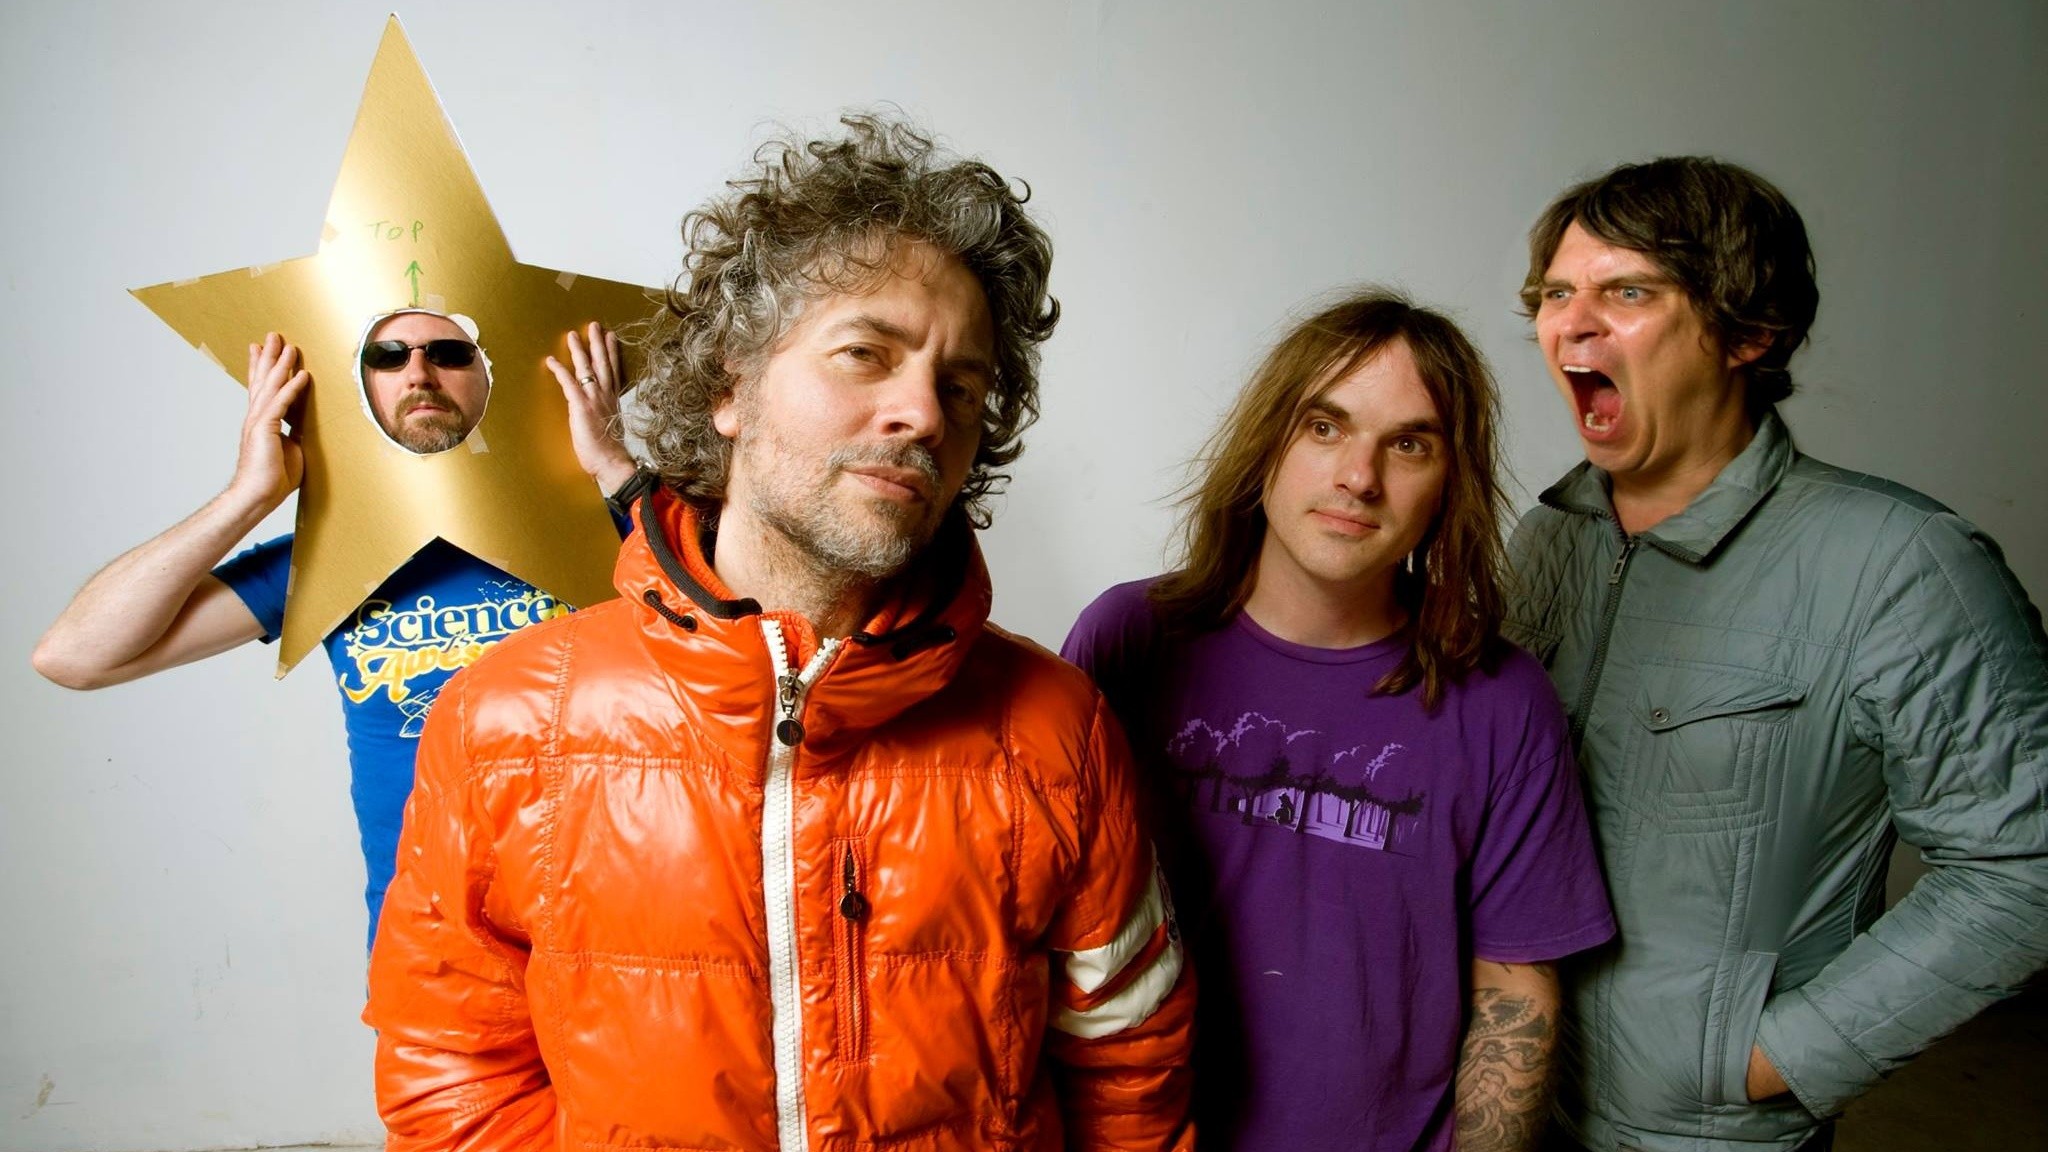 The Gathering with The Flaming Lips x Jagwar Ma